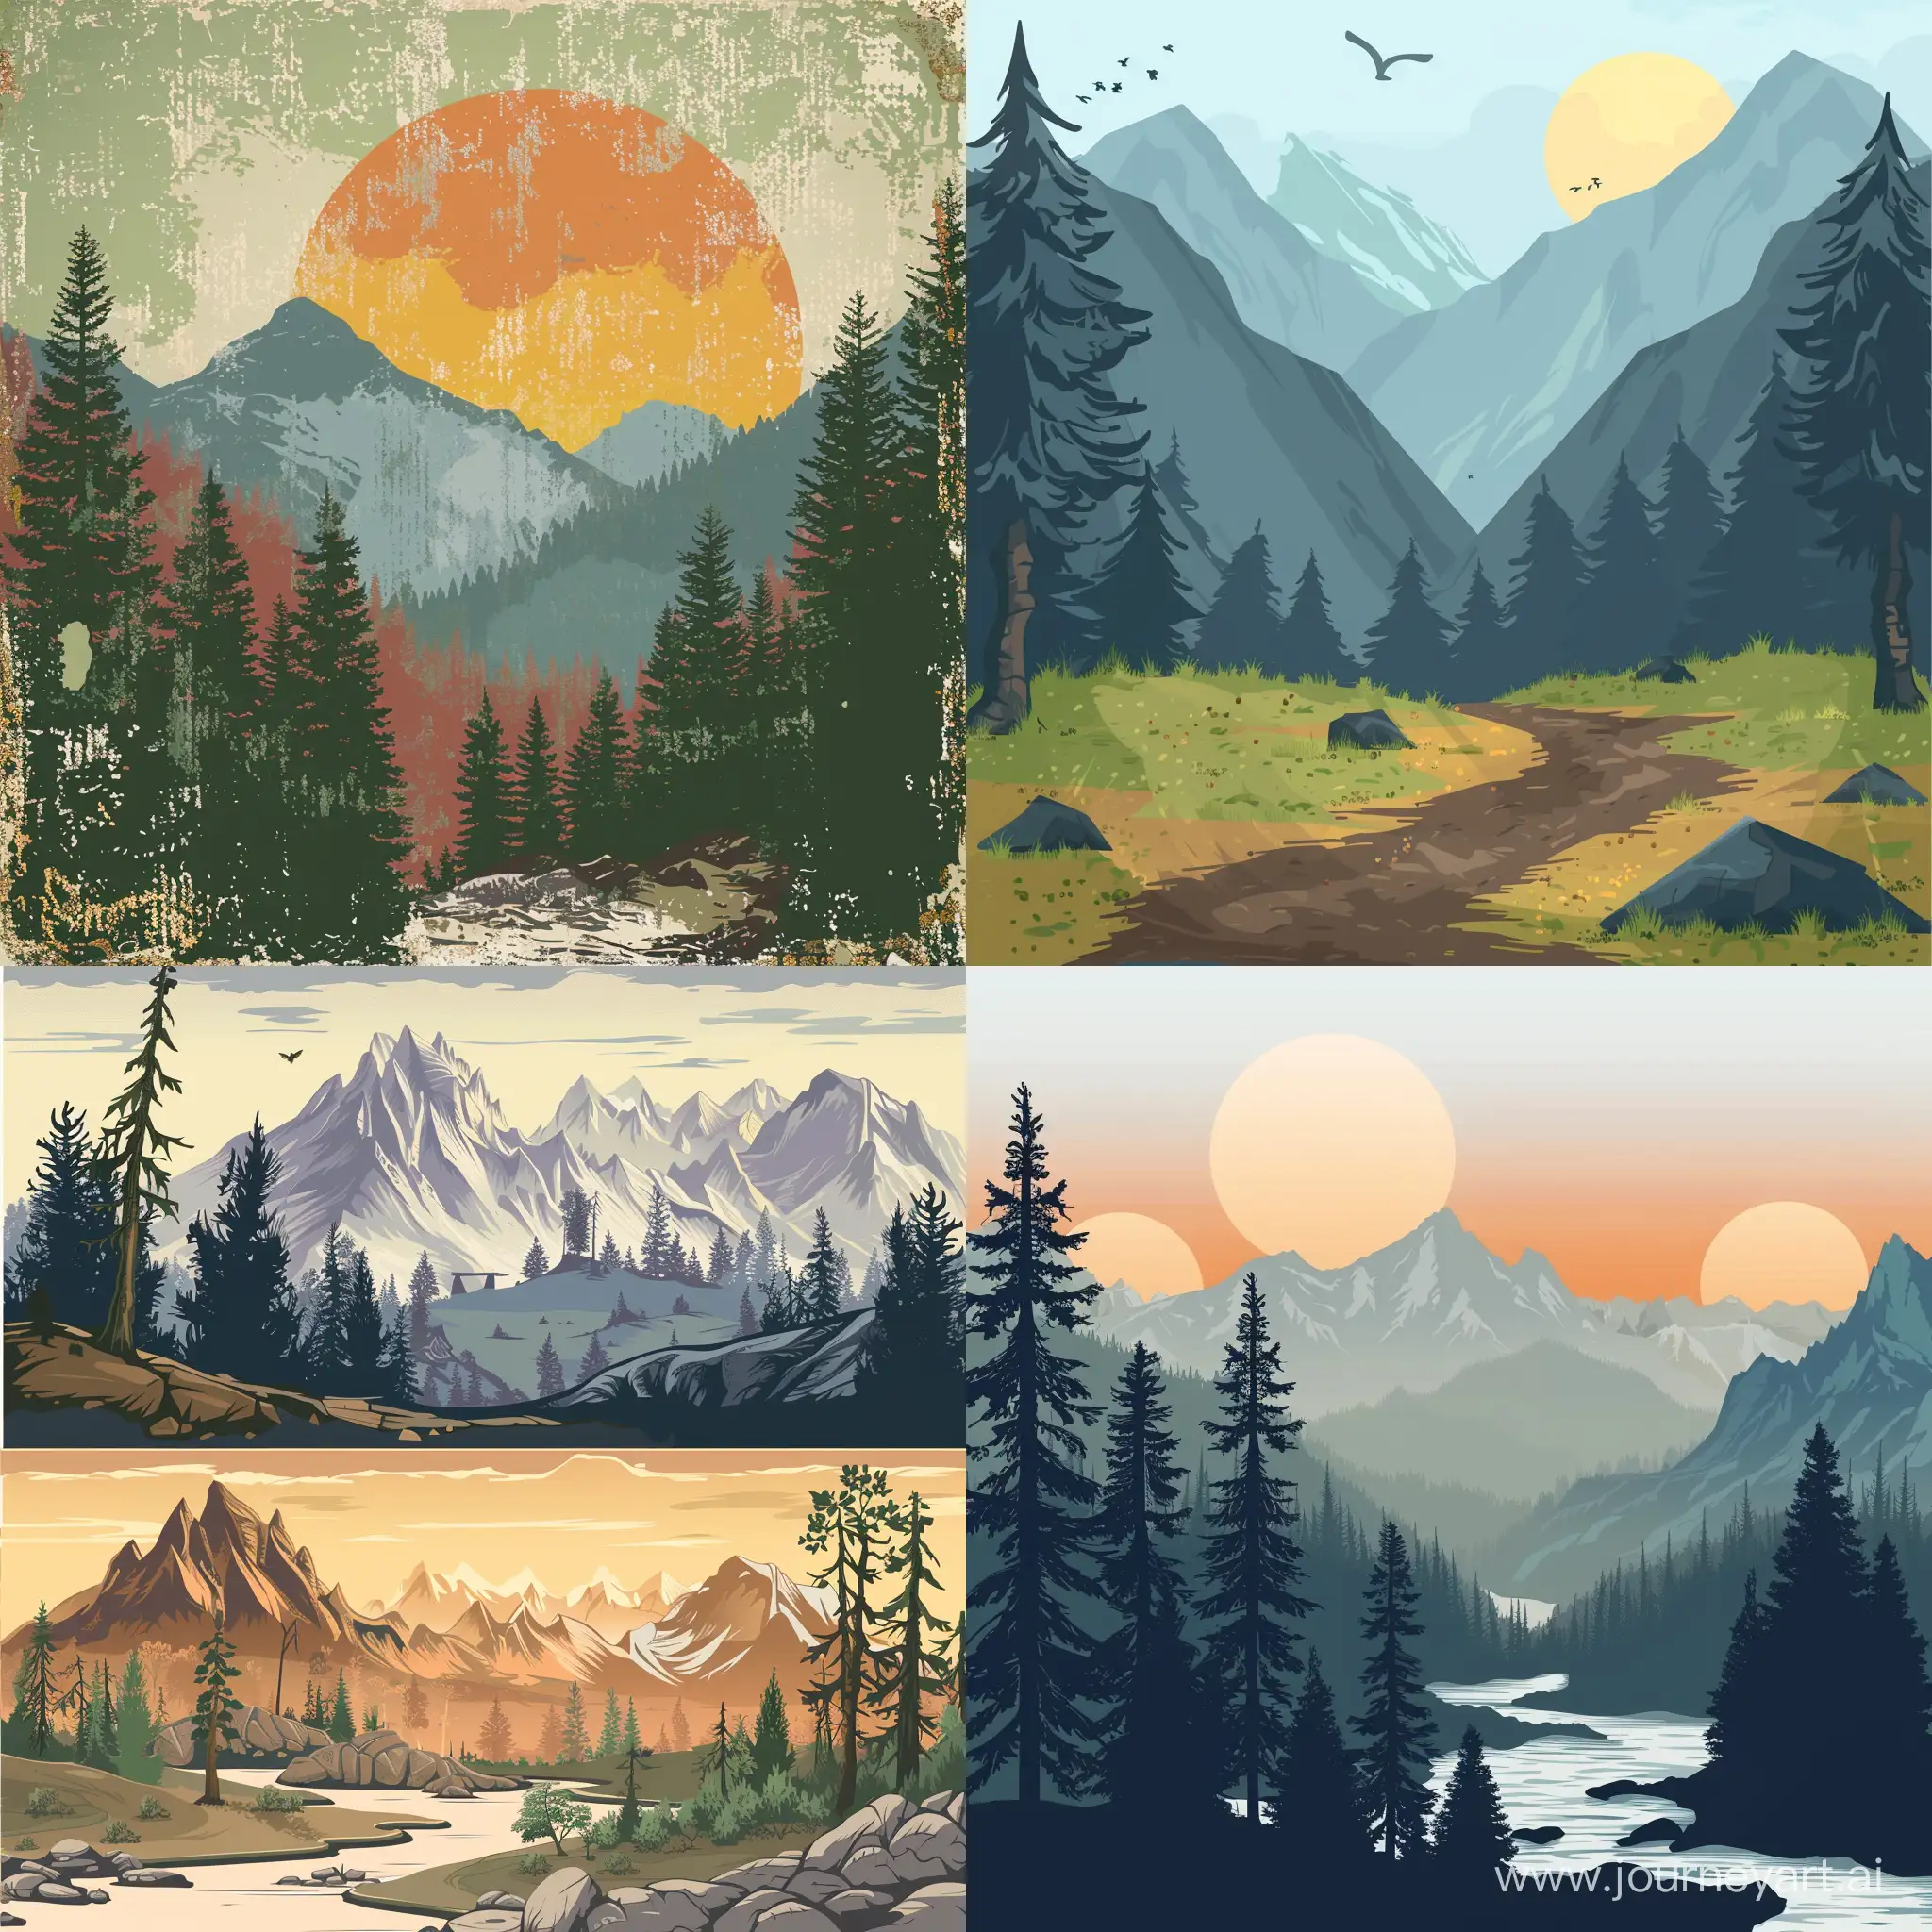 landscape with using texture brushes, in the style of mountainous vistas, adventure themed, in vector style